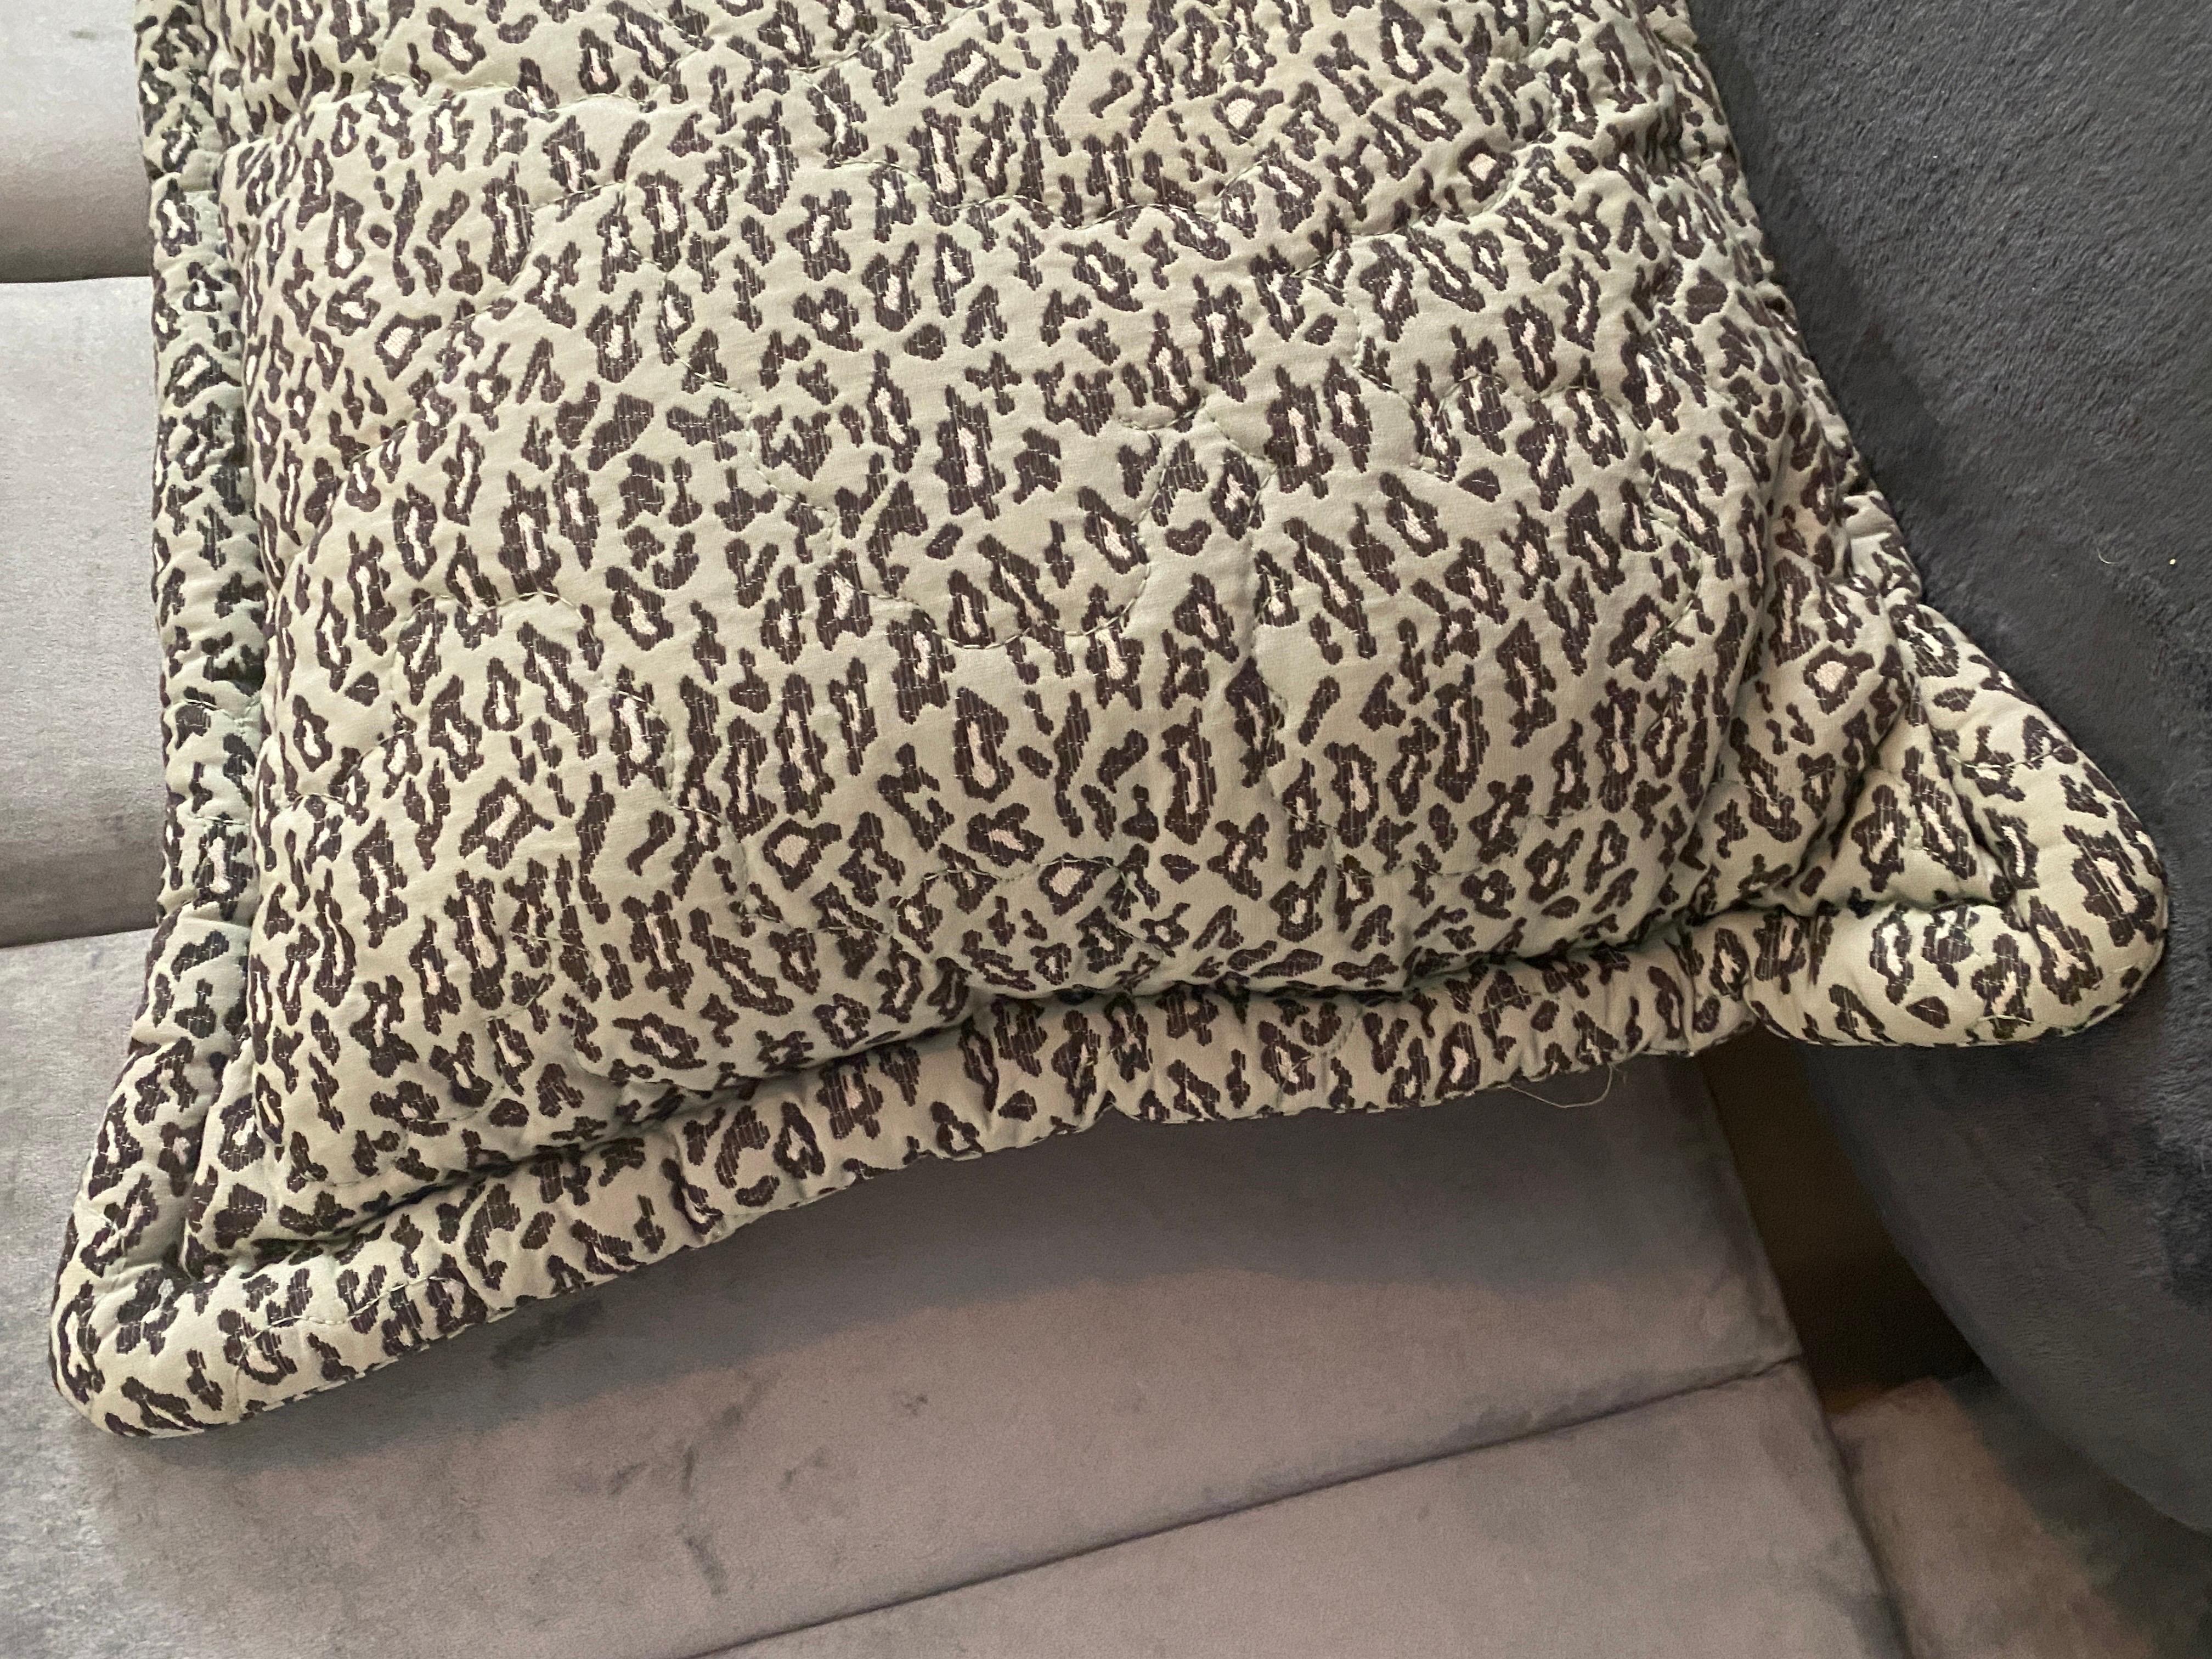 Pair of Rare Jay Spectre Quilted Pillow Shams in Mint & Black/White Leopard  For Sale 2